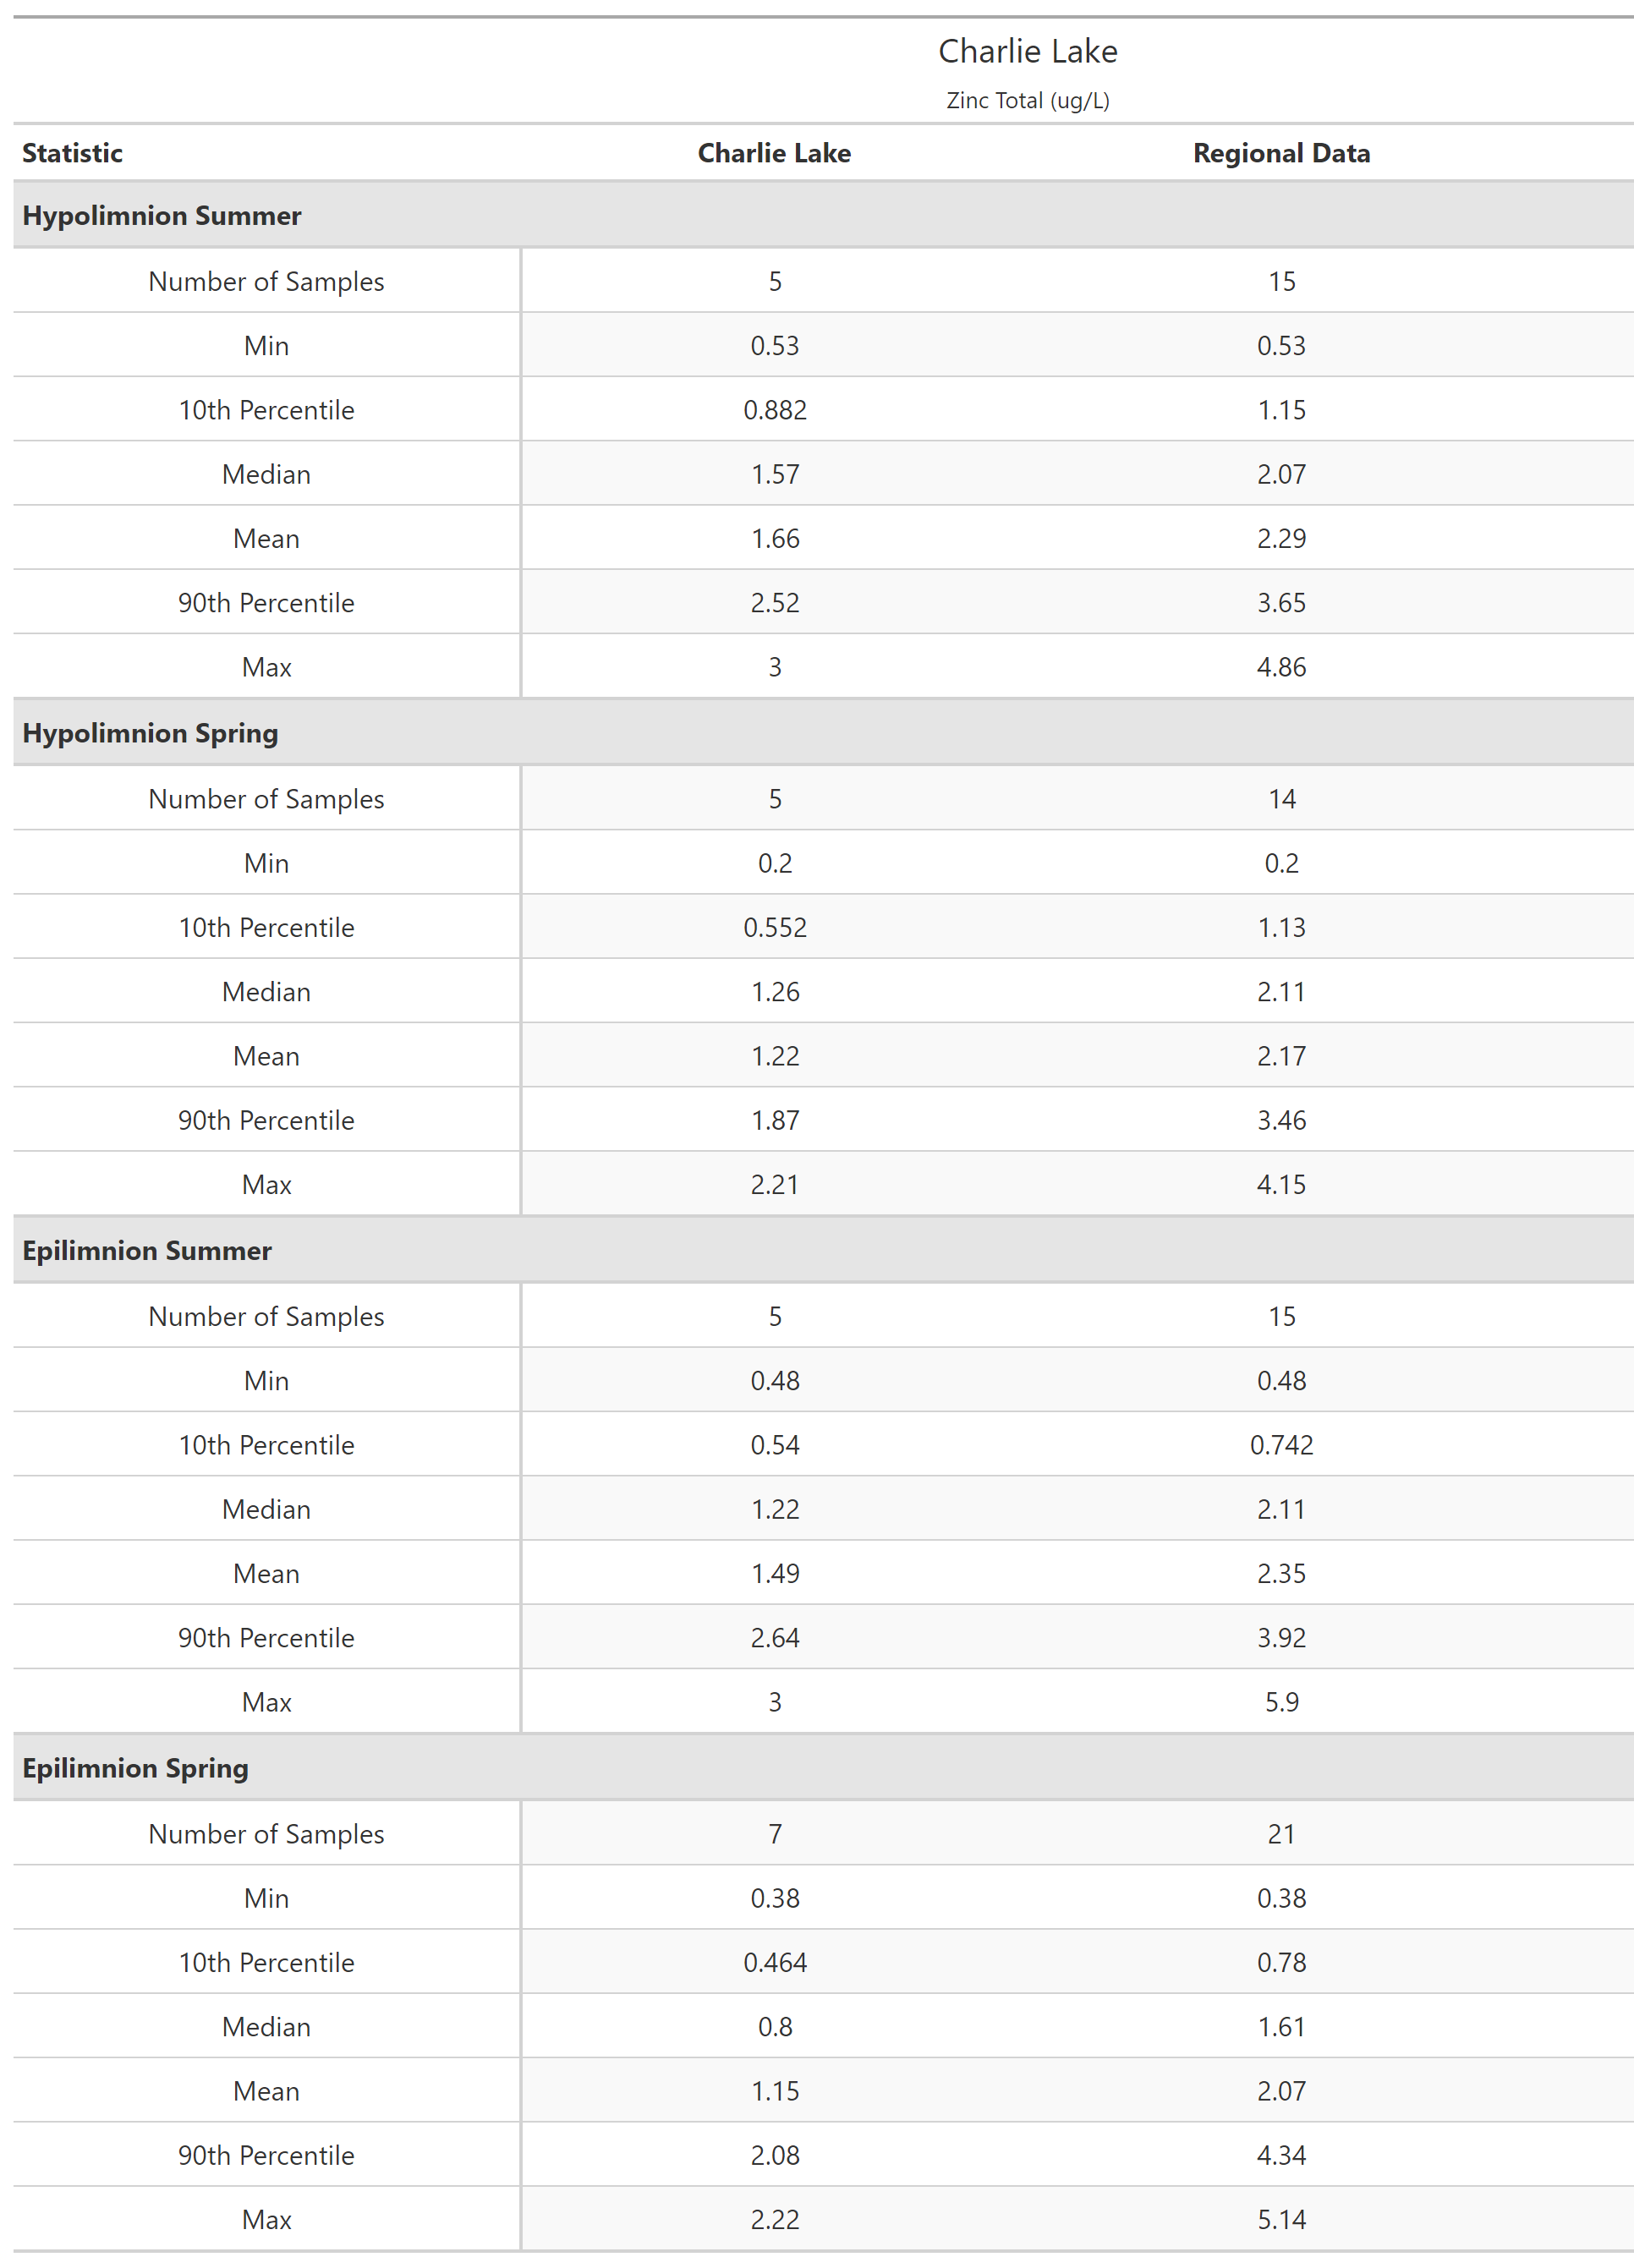 A table of summary statistics for Zinc Total with comparison to regional data